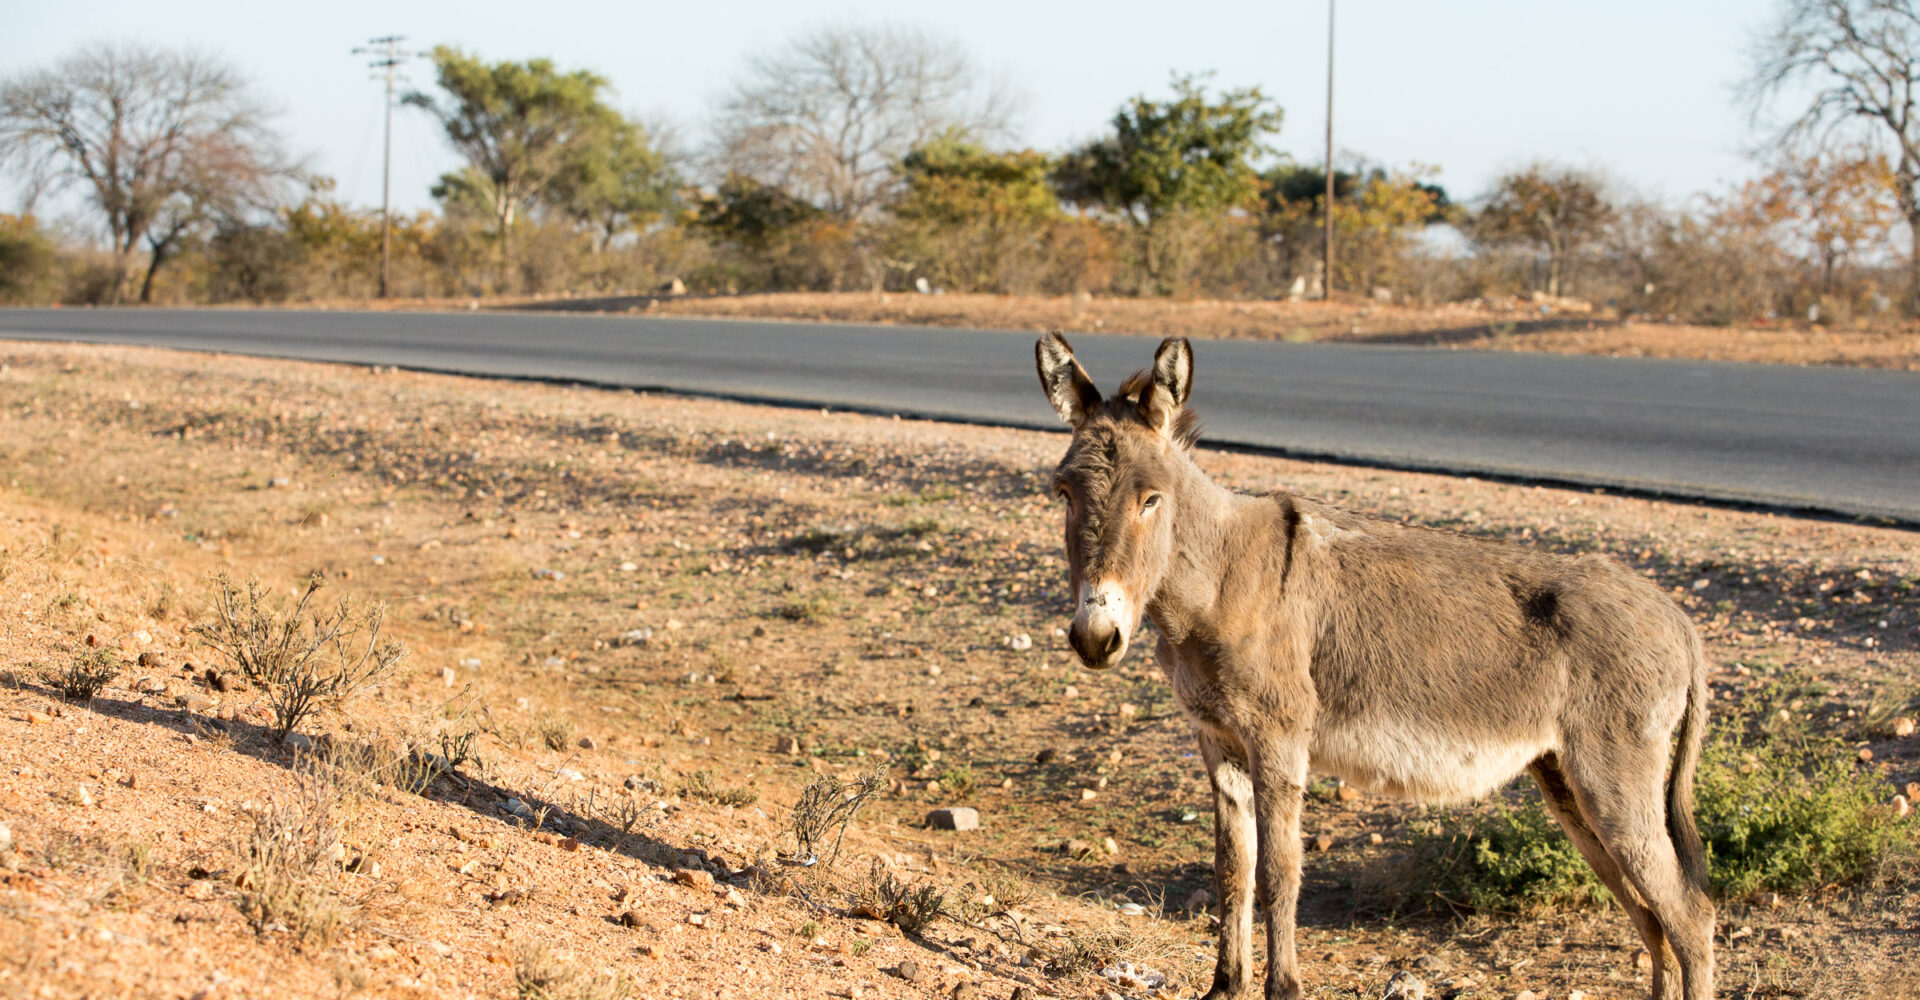 A donkey stands next to a rural road in Zimbabwe.